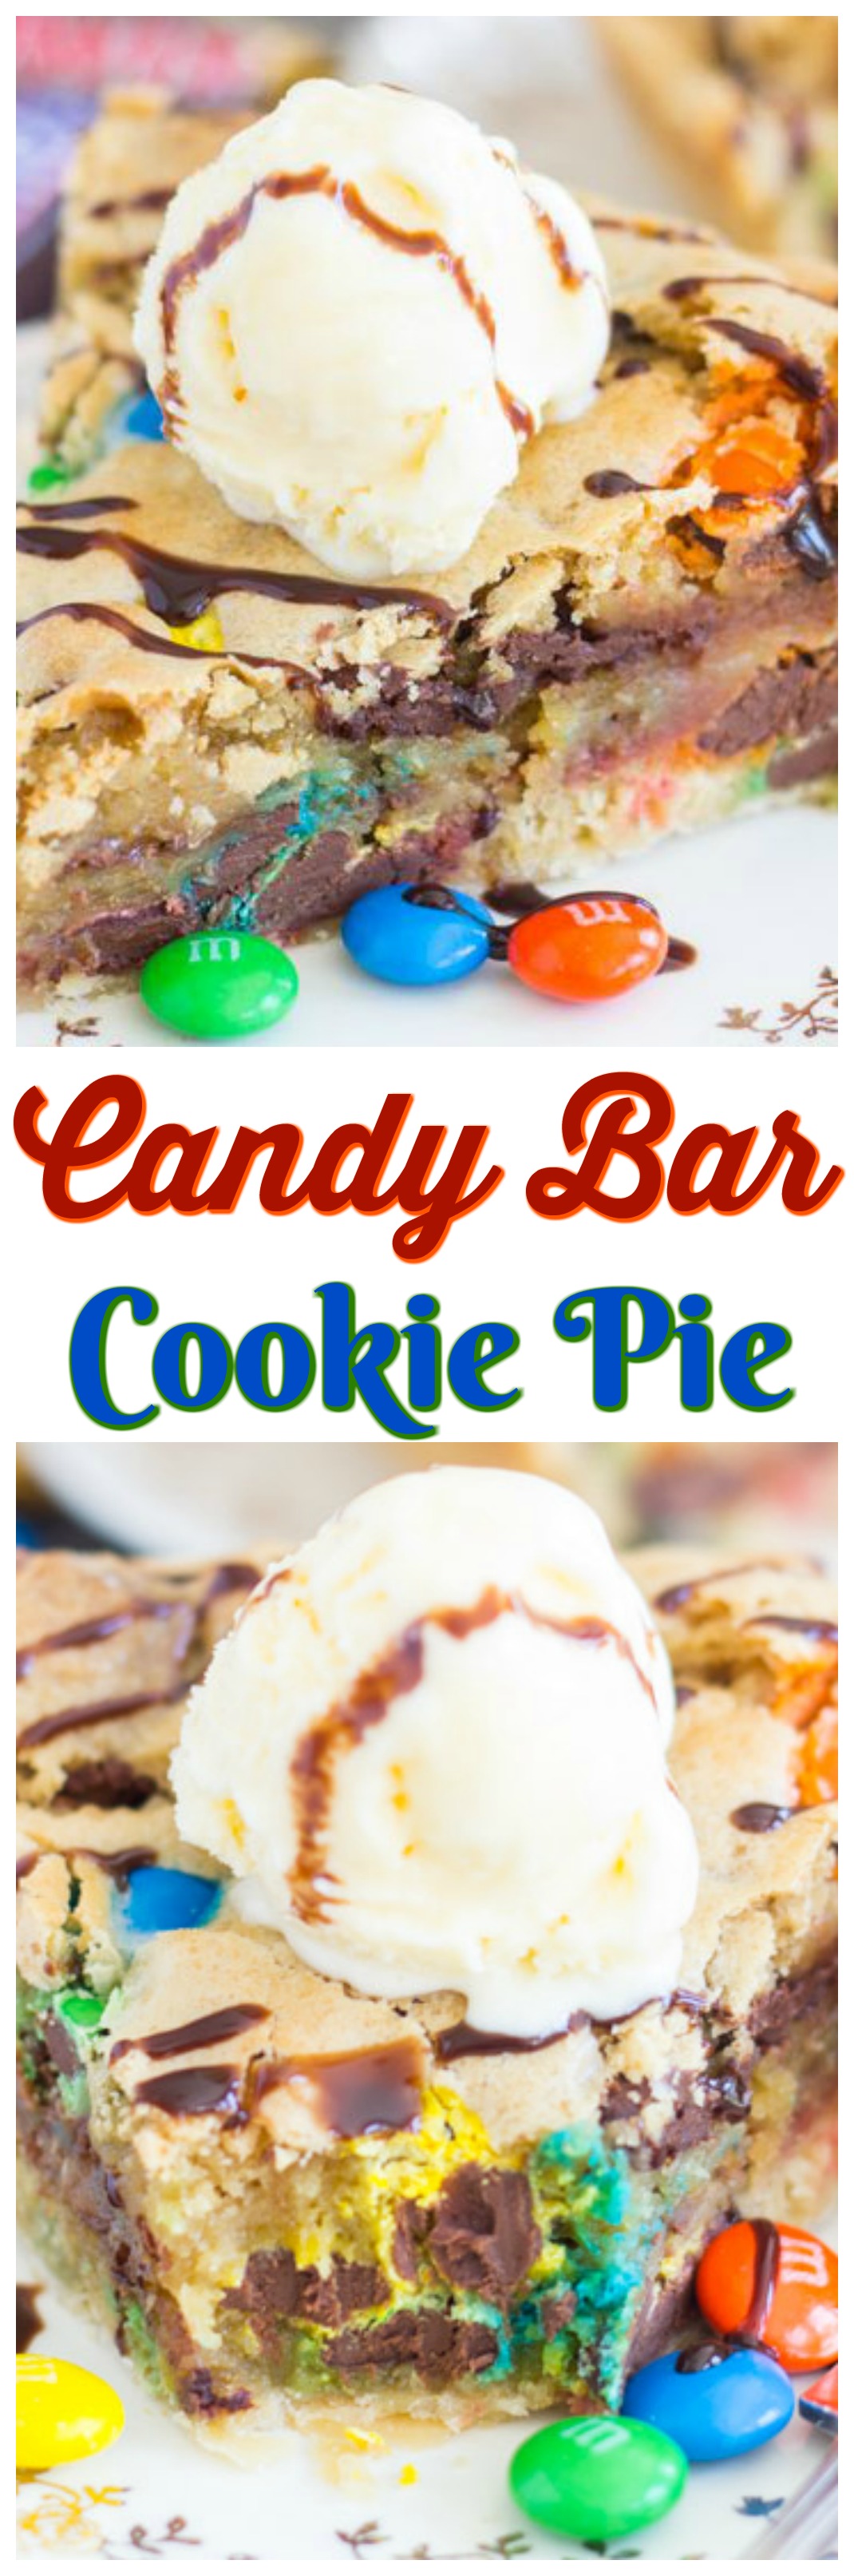 Leftover Halloween Candy Bar Cookie Pie - The Gold Lining Girl